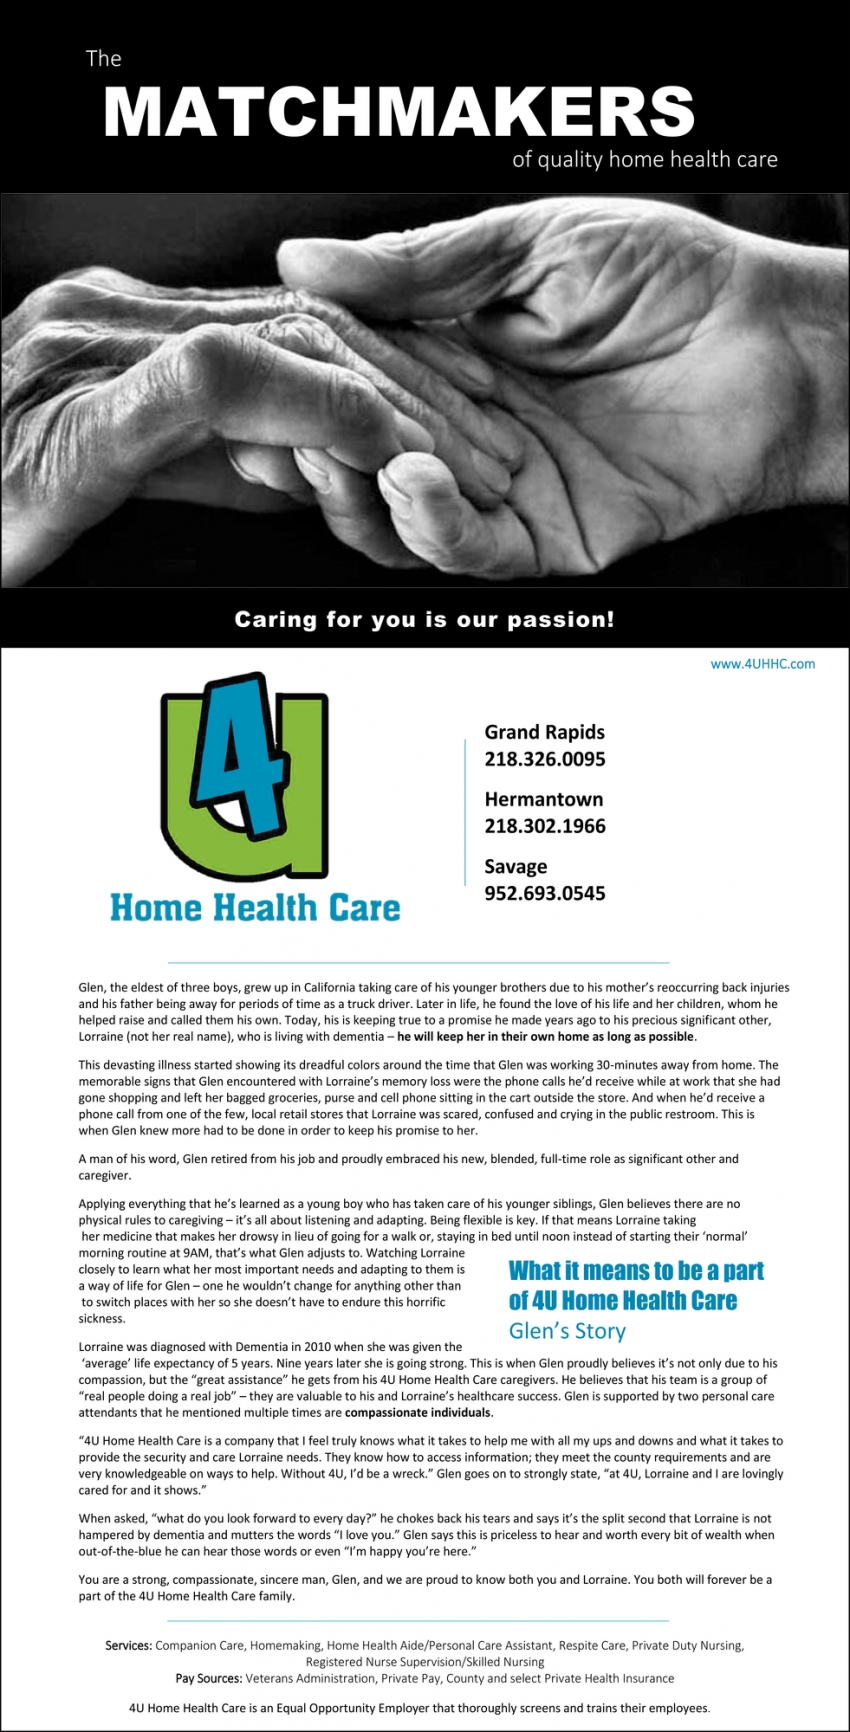 The Matchmakers Of Quality Home Health Care